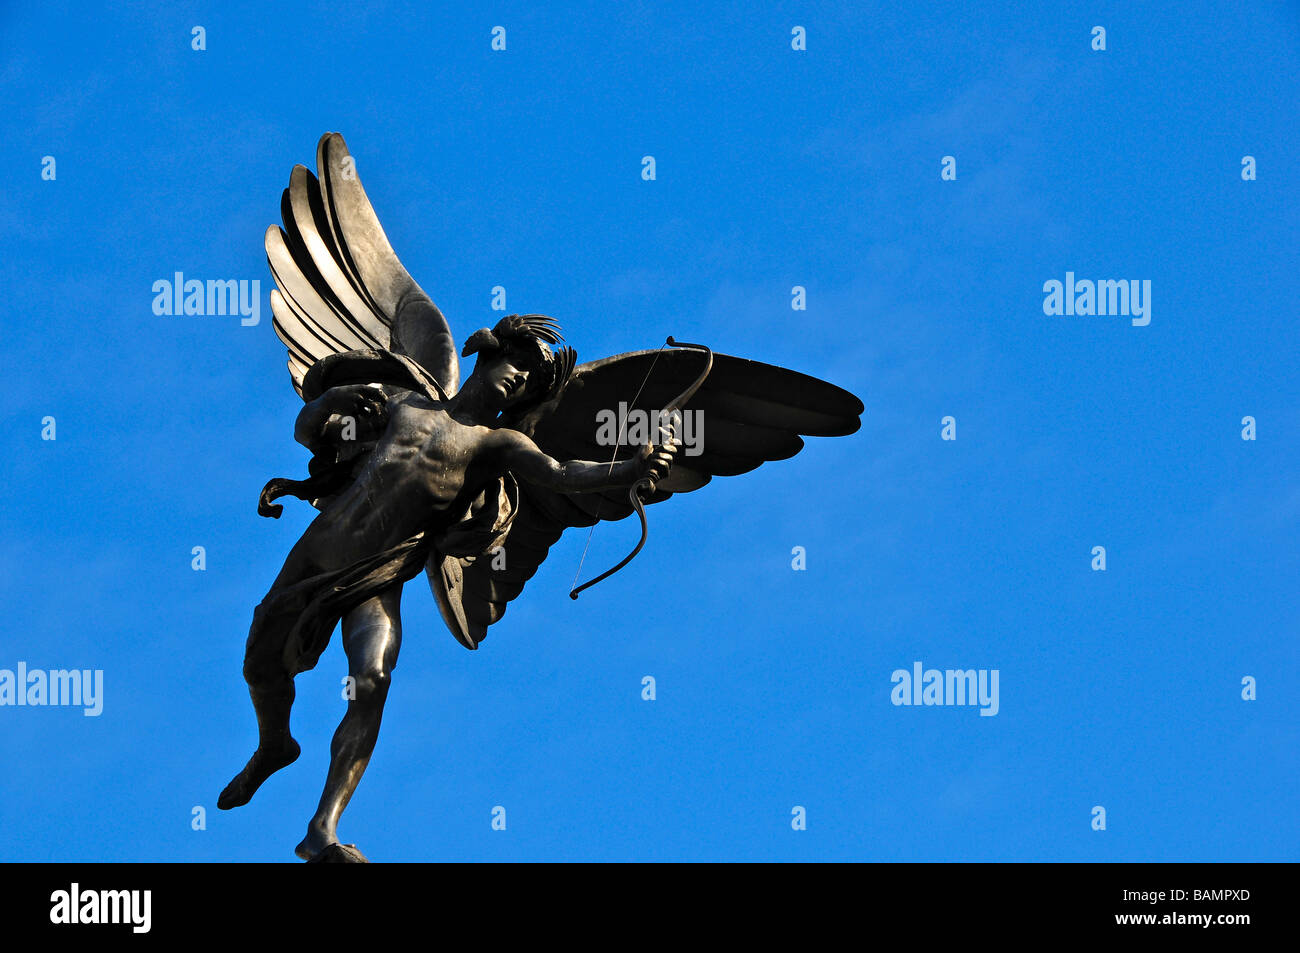 Statue de Eros, Piccadilly Circus, Londres, Angleterre Banque D'Images